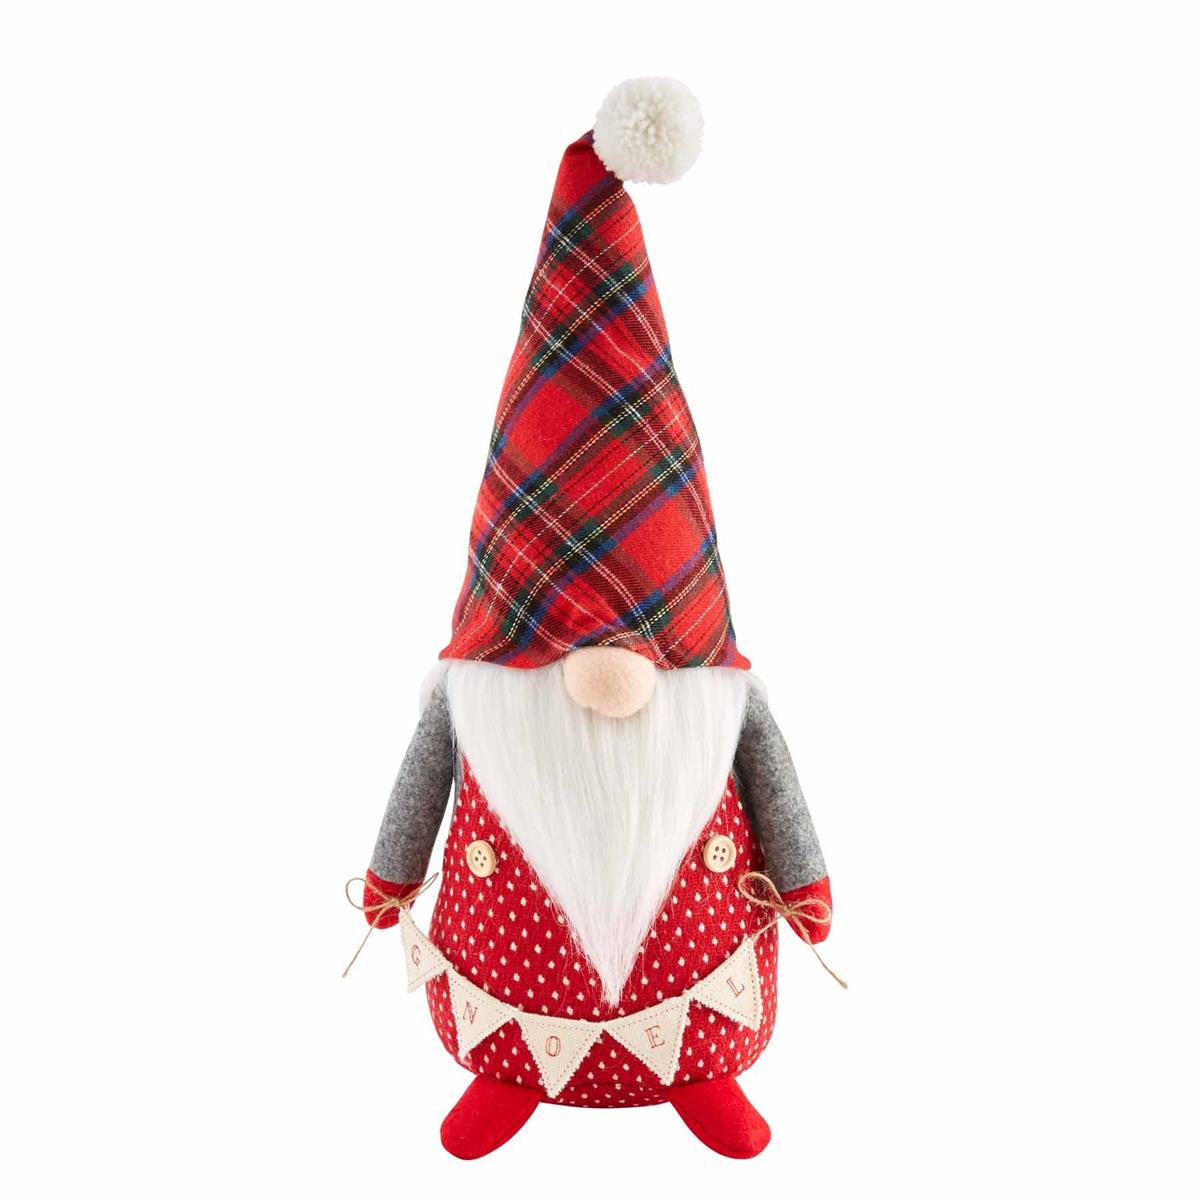 A Large Dot Christmas Gnome Sitter from Mud Pie.